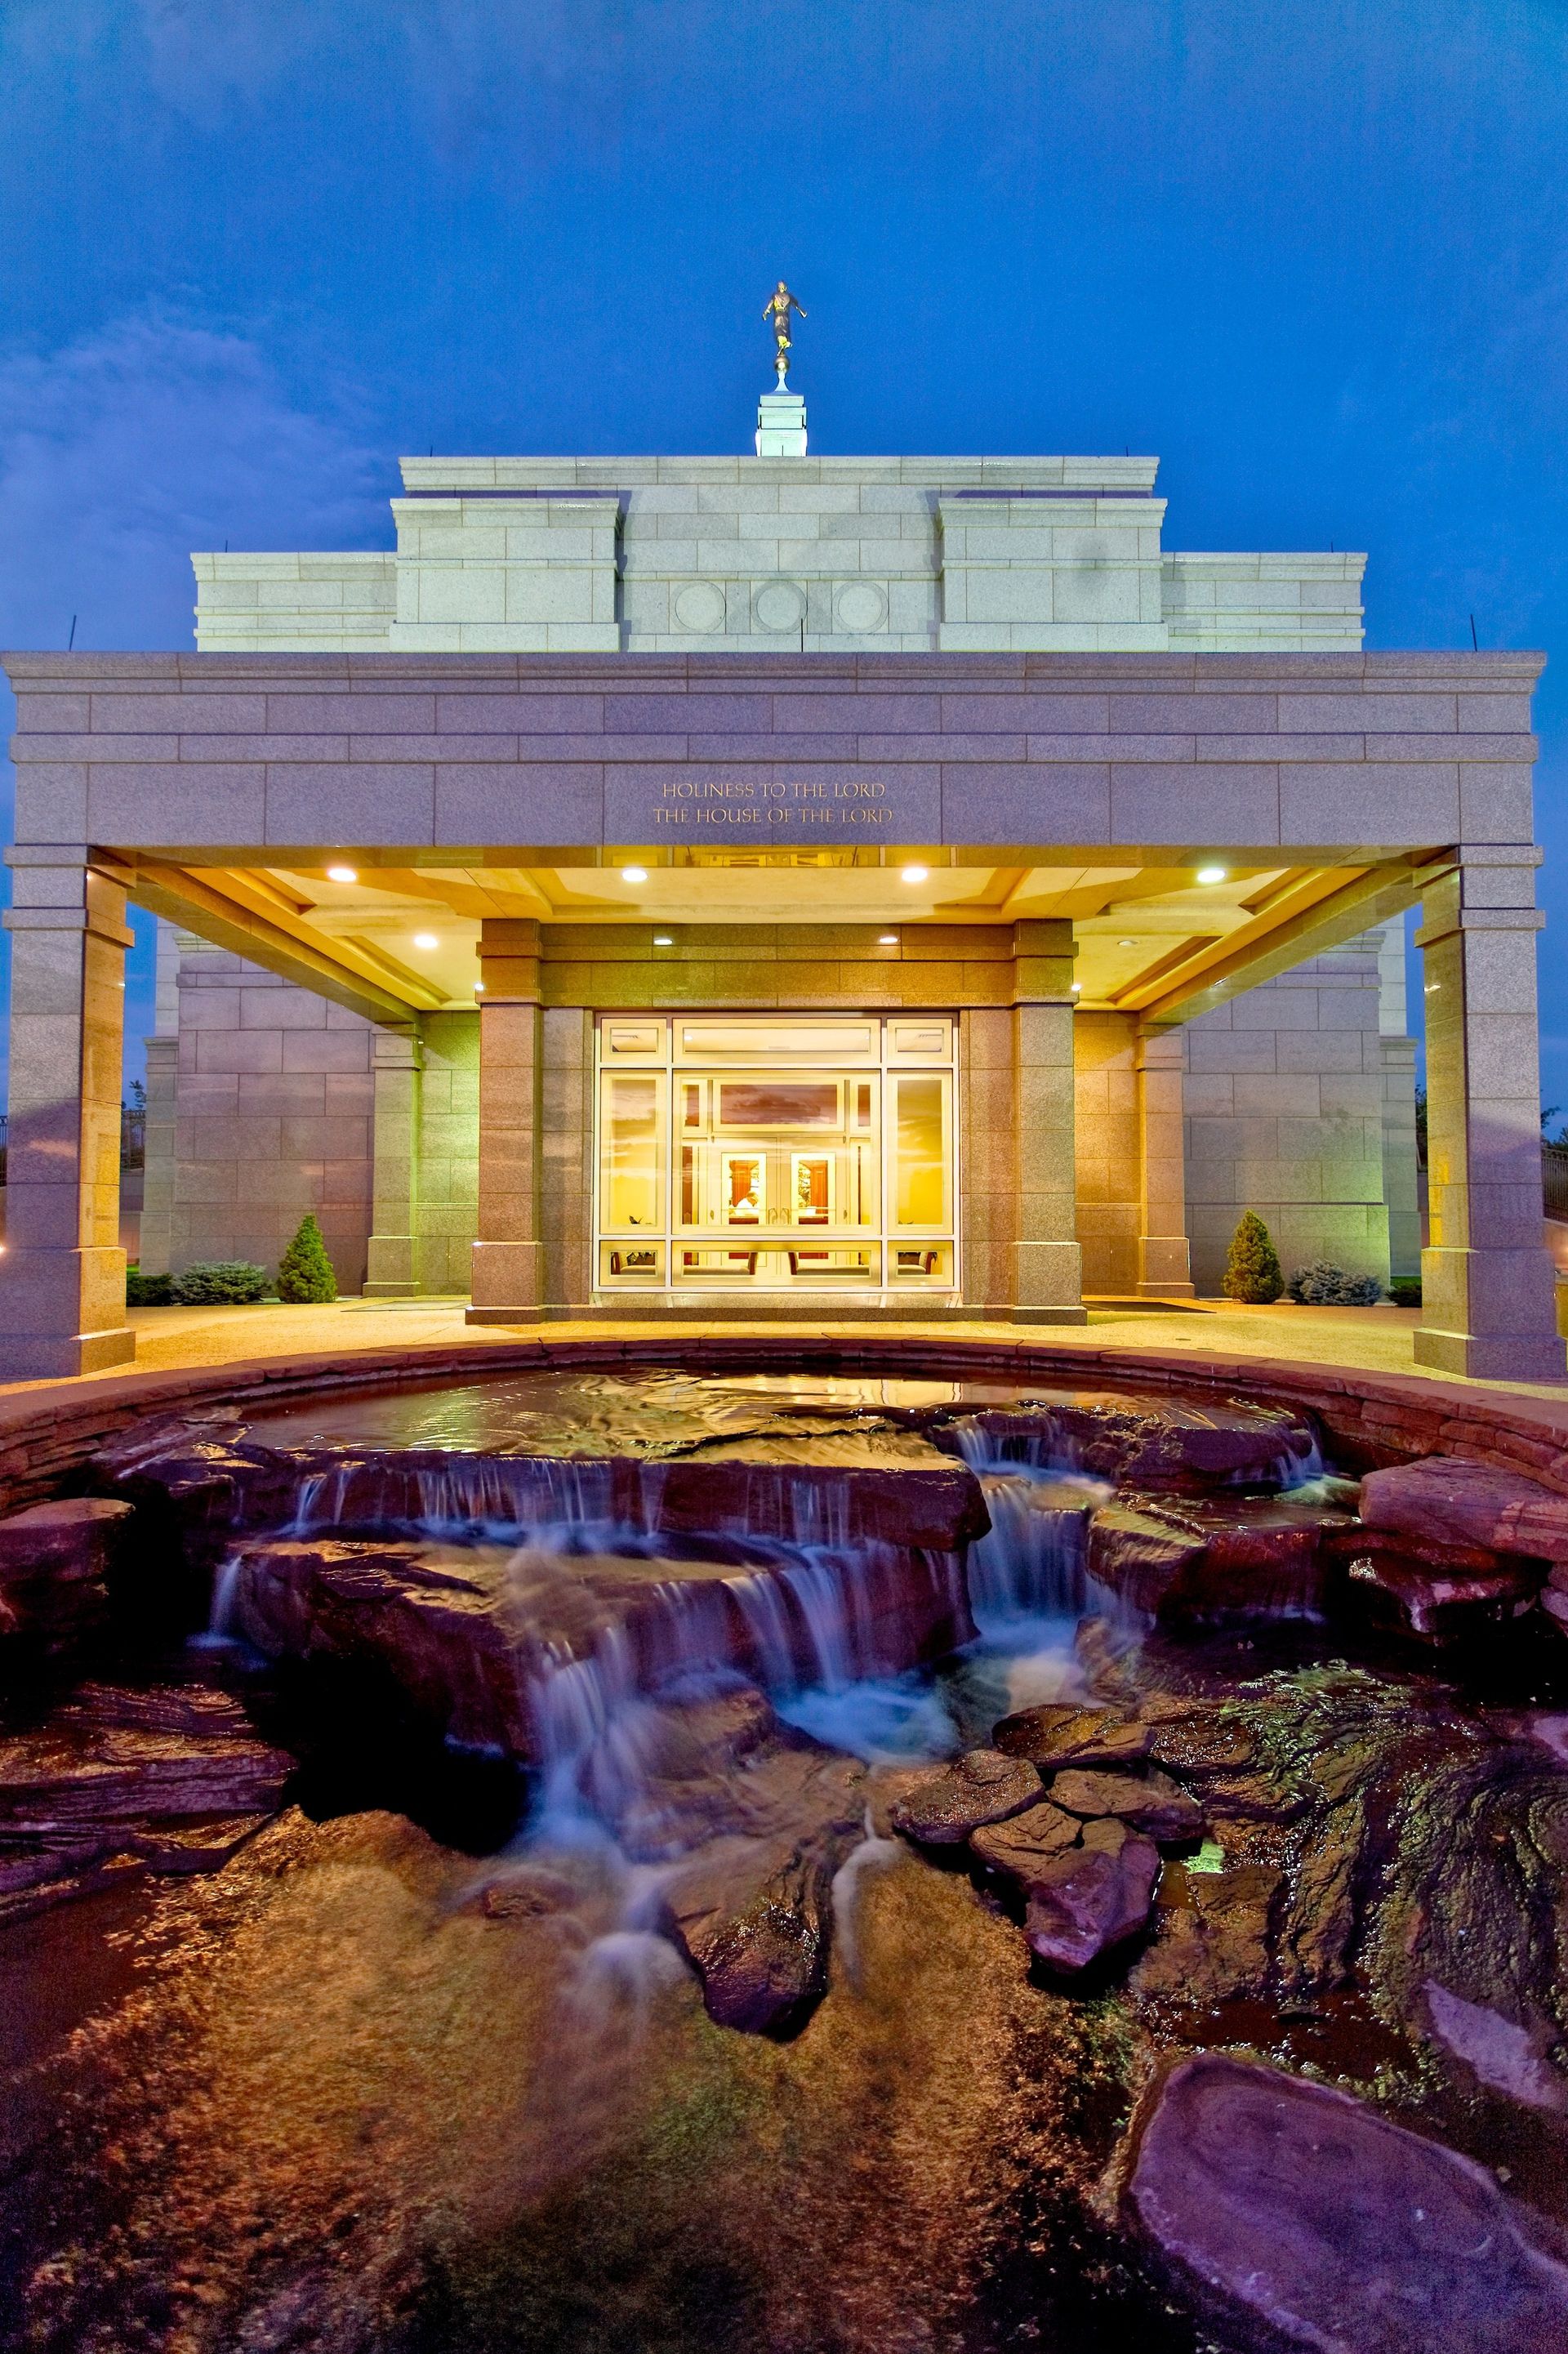 The Snowflake Arizona Temple, including the entrance and fountain.